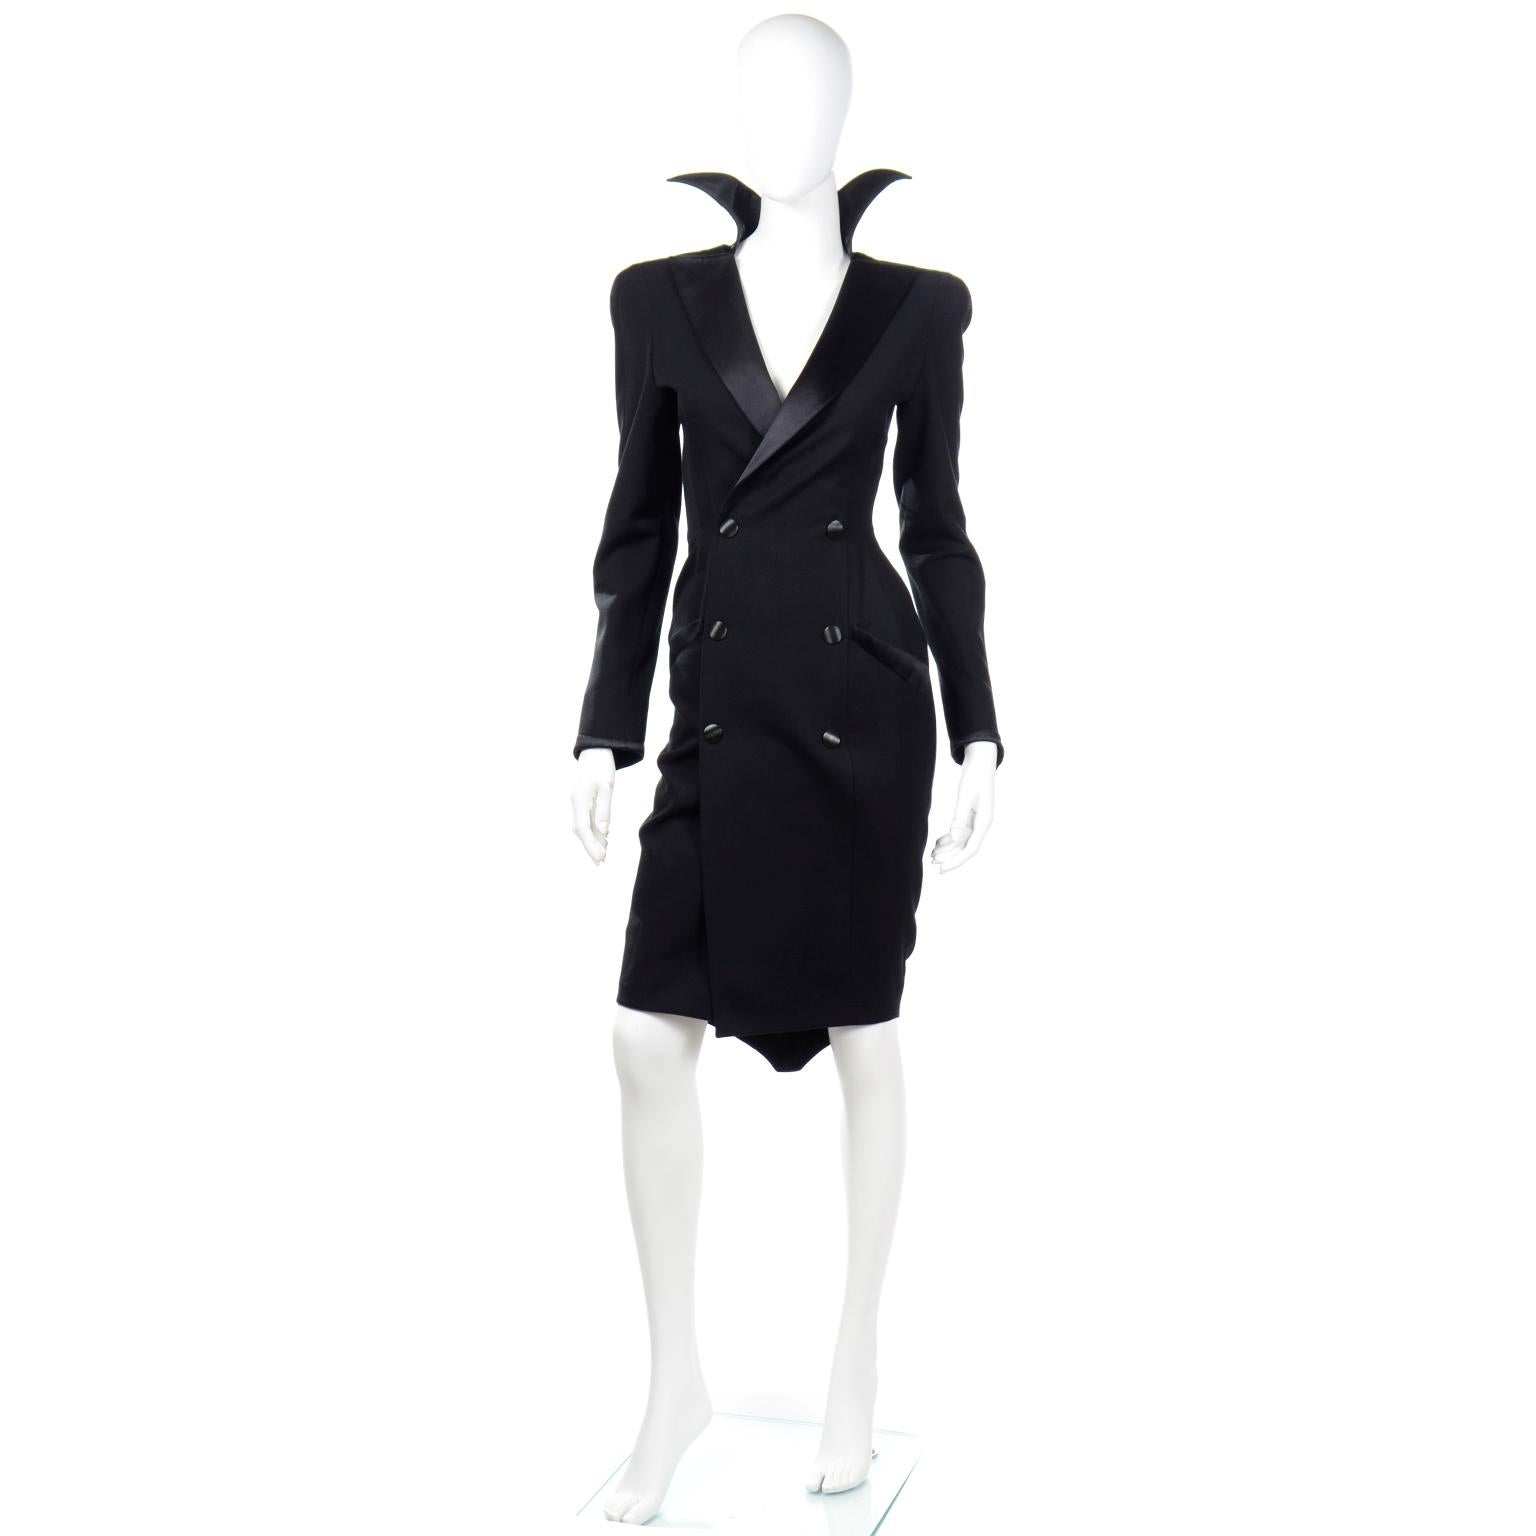 This is an ultra dramatic vintage Thierry Mugler coat or coat dress in a black combed wool crepe with black satin trim. We especially love the Cruella deVille style stand up collar! The dress is double breasted with large black decorative buttons